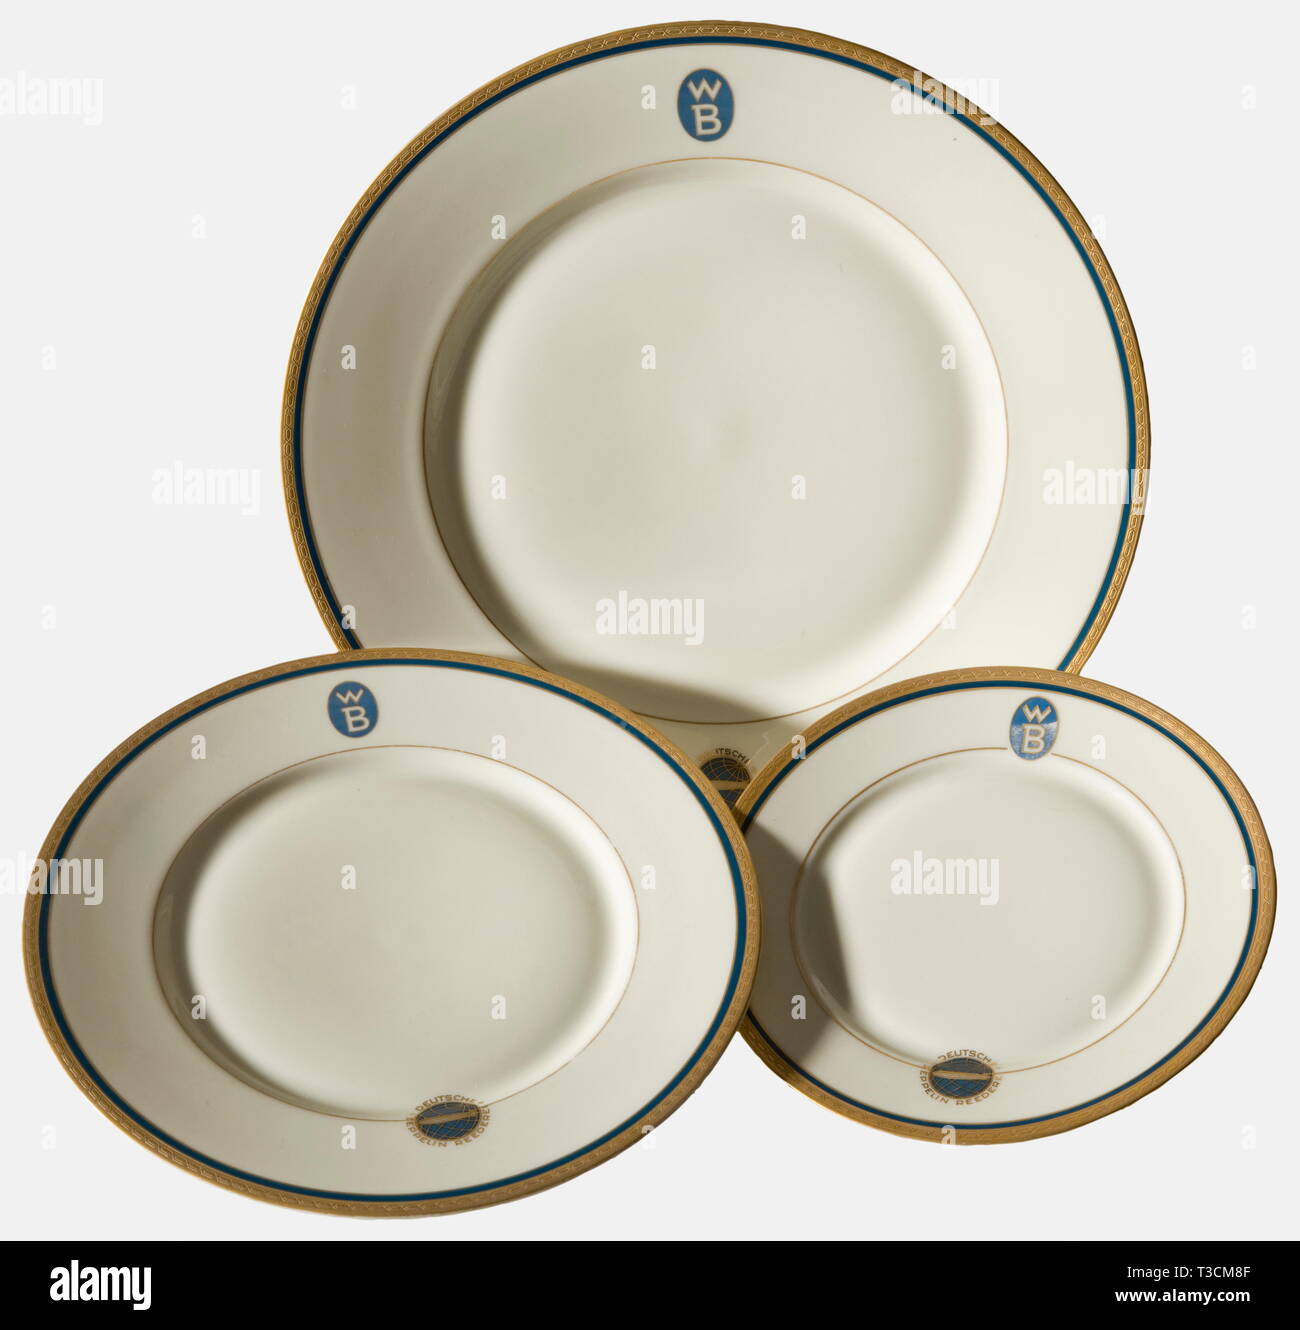 Three plates from the dining service, of the Zeppelin Shipping Line Each  with etched gold décor border set off in blue, the blue/gold emblem of the  Zeppelin Shipping Line with opposing "WB"